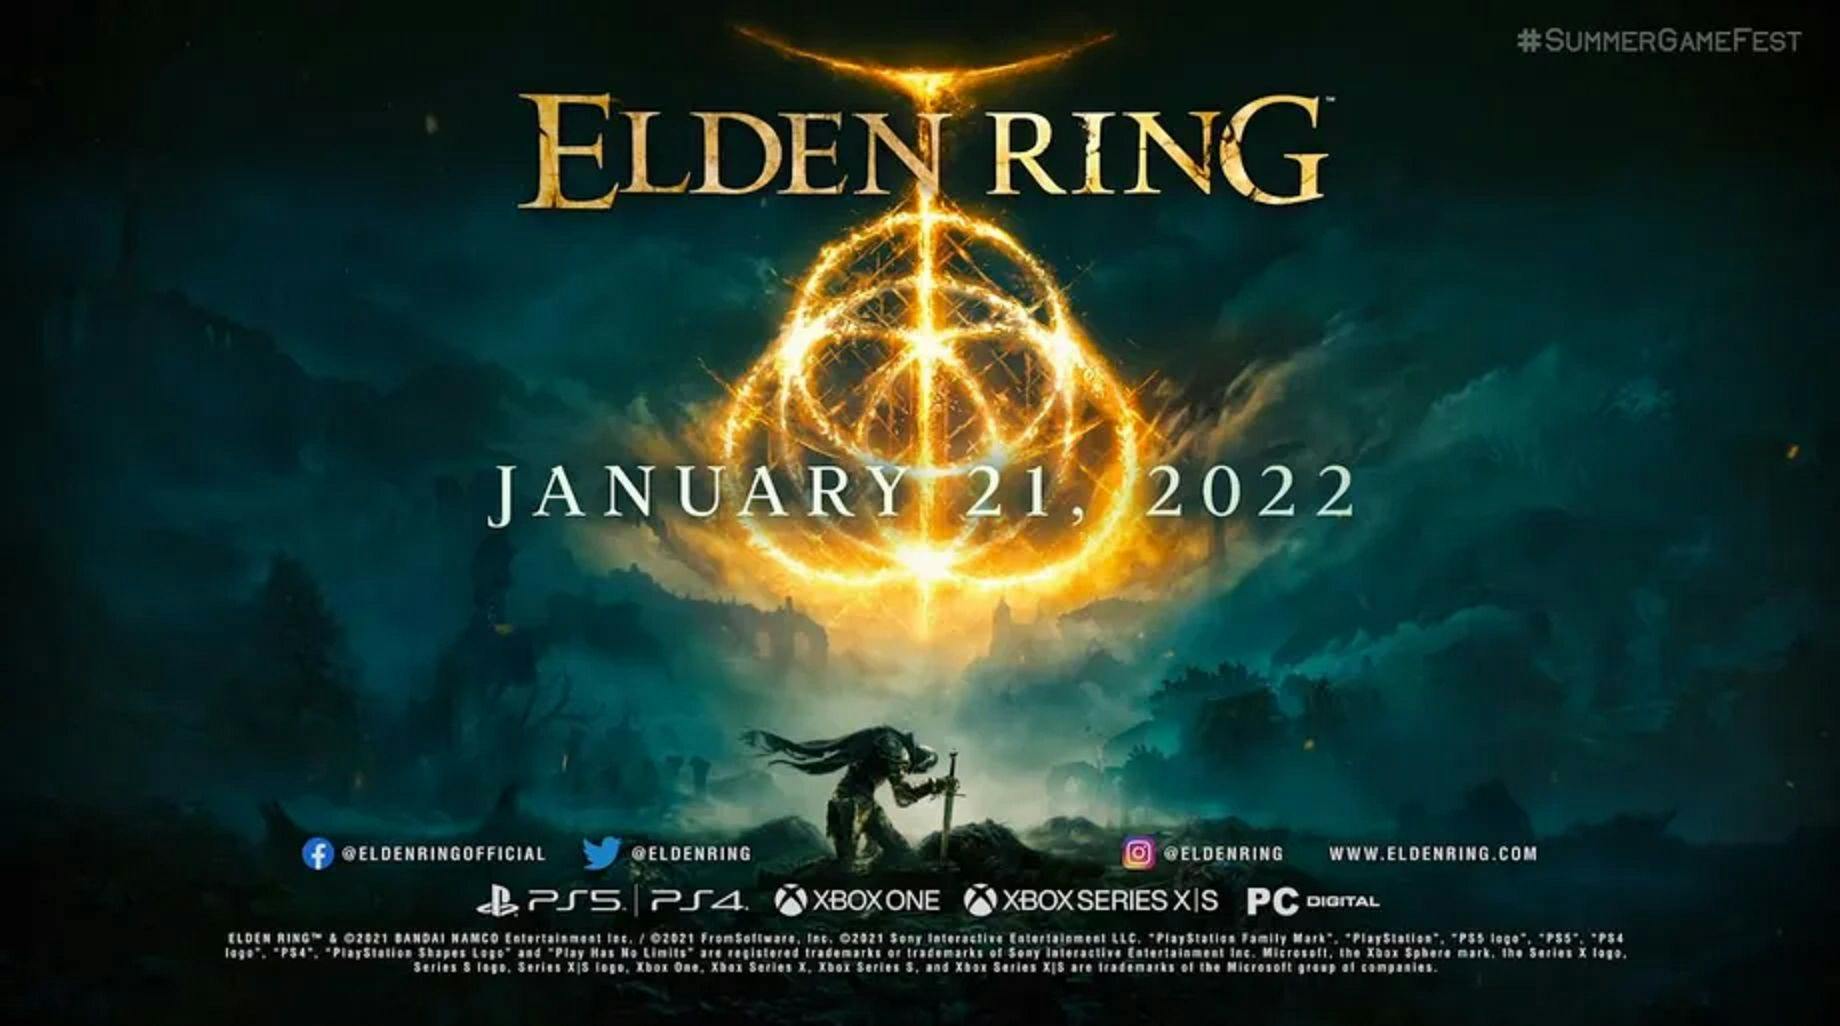 /elden-ring-release-date-set-for-january-21st-2022-zk3c353k feature image